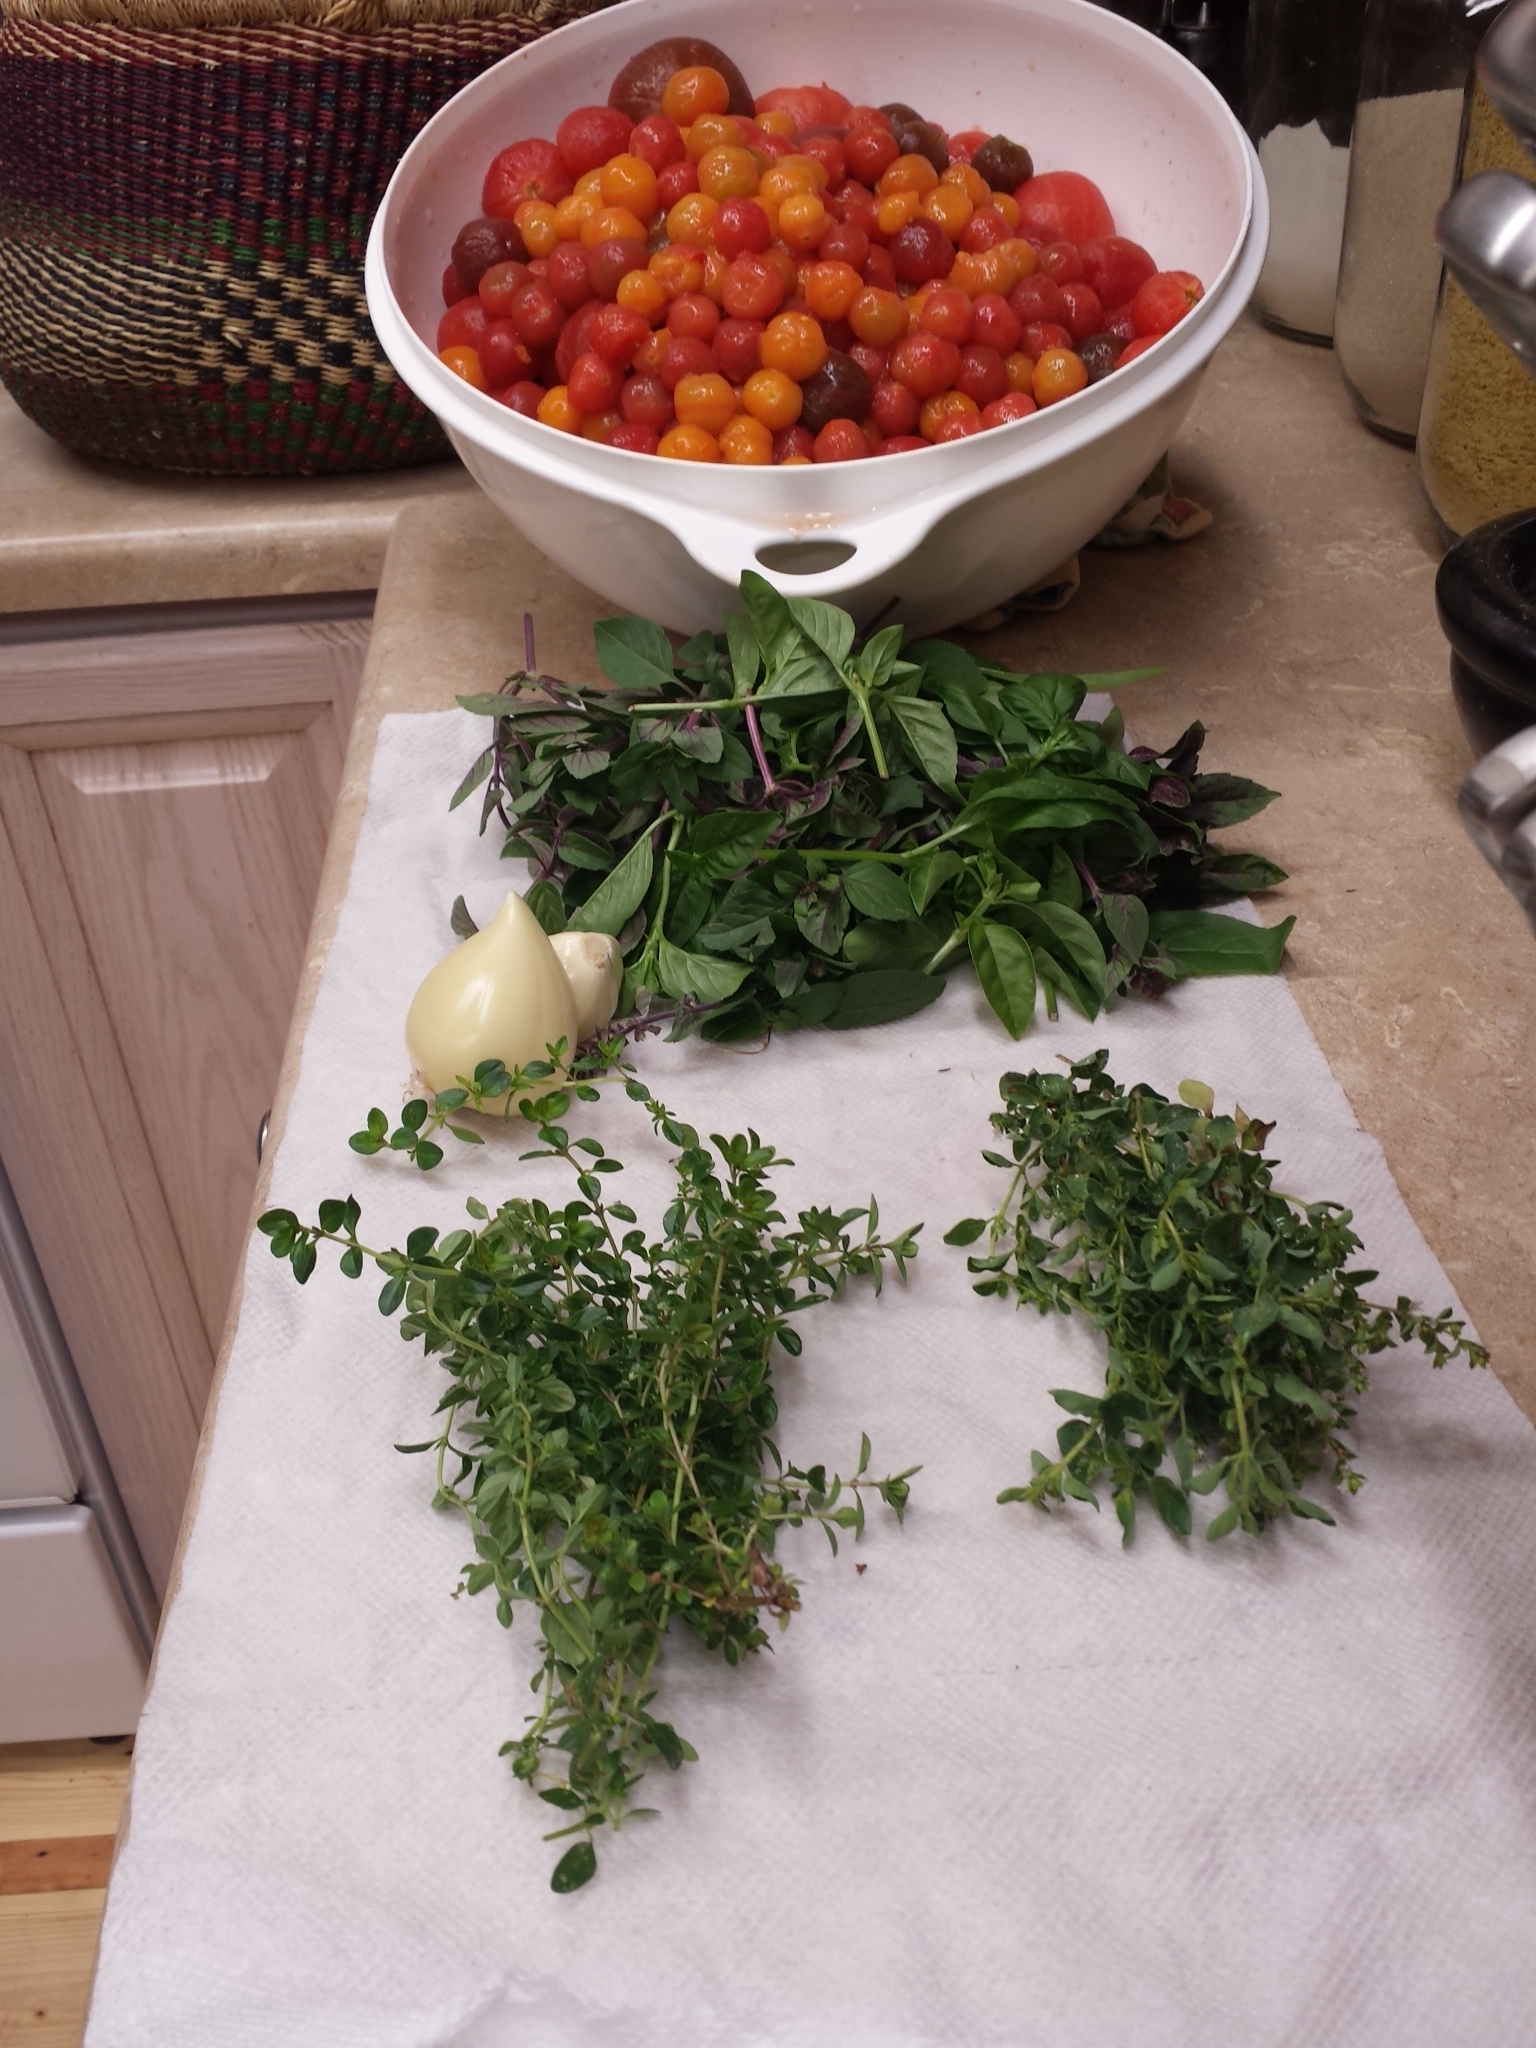 Tomatoes peeled and herbs gathered.